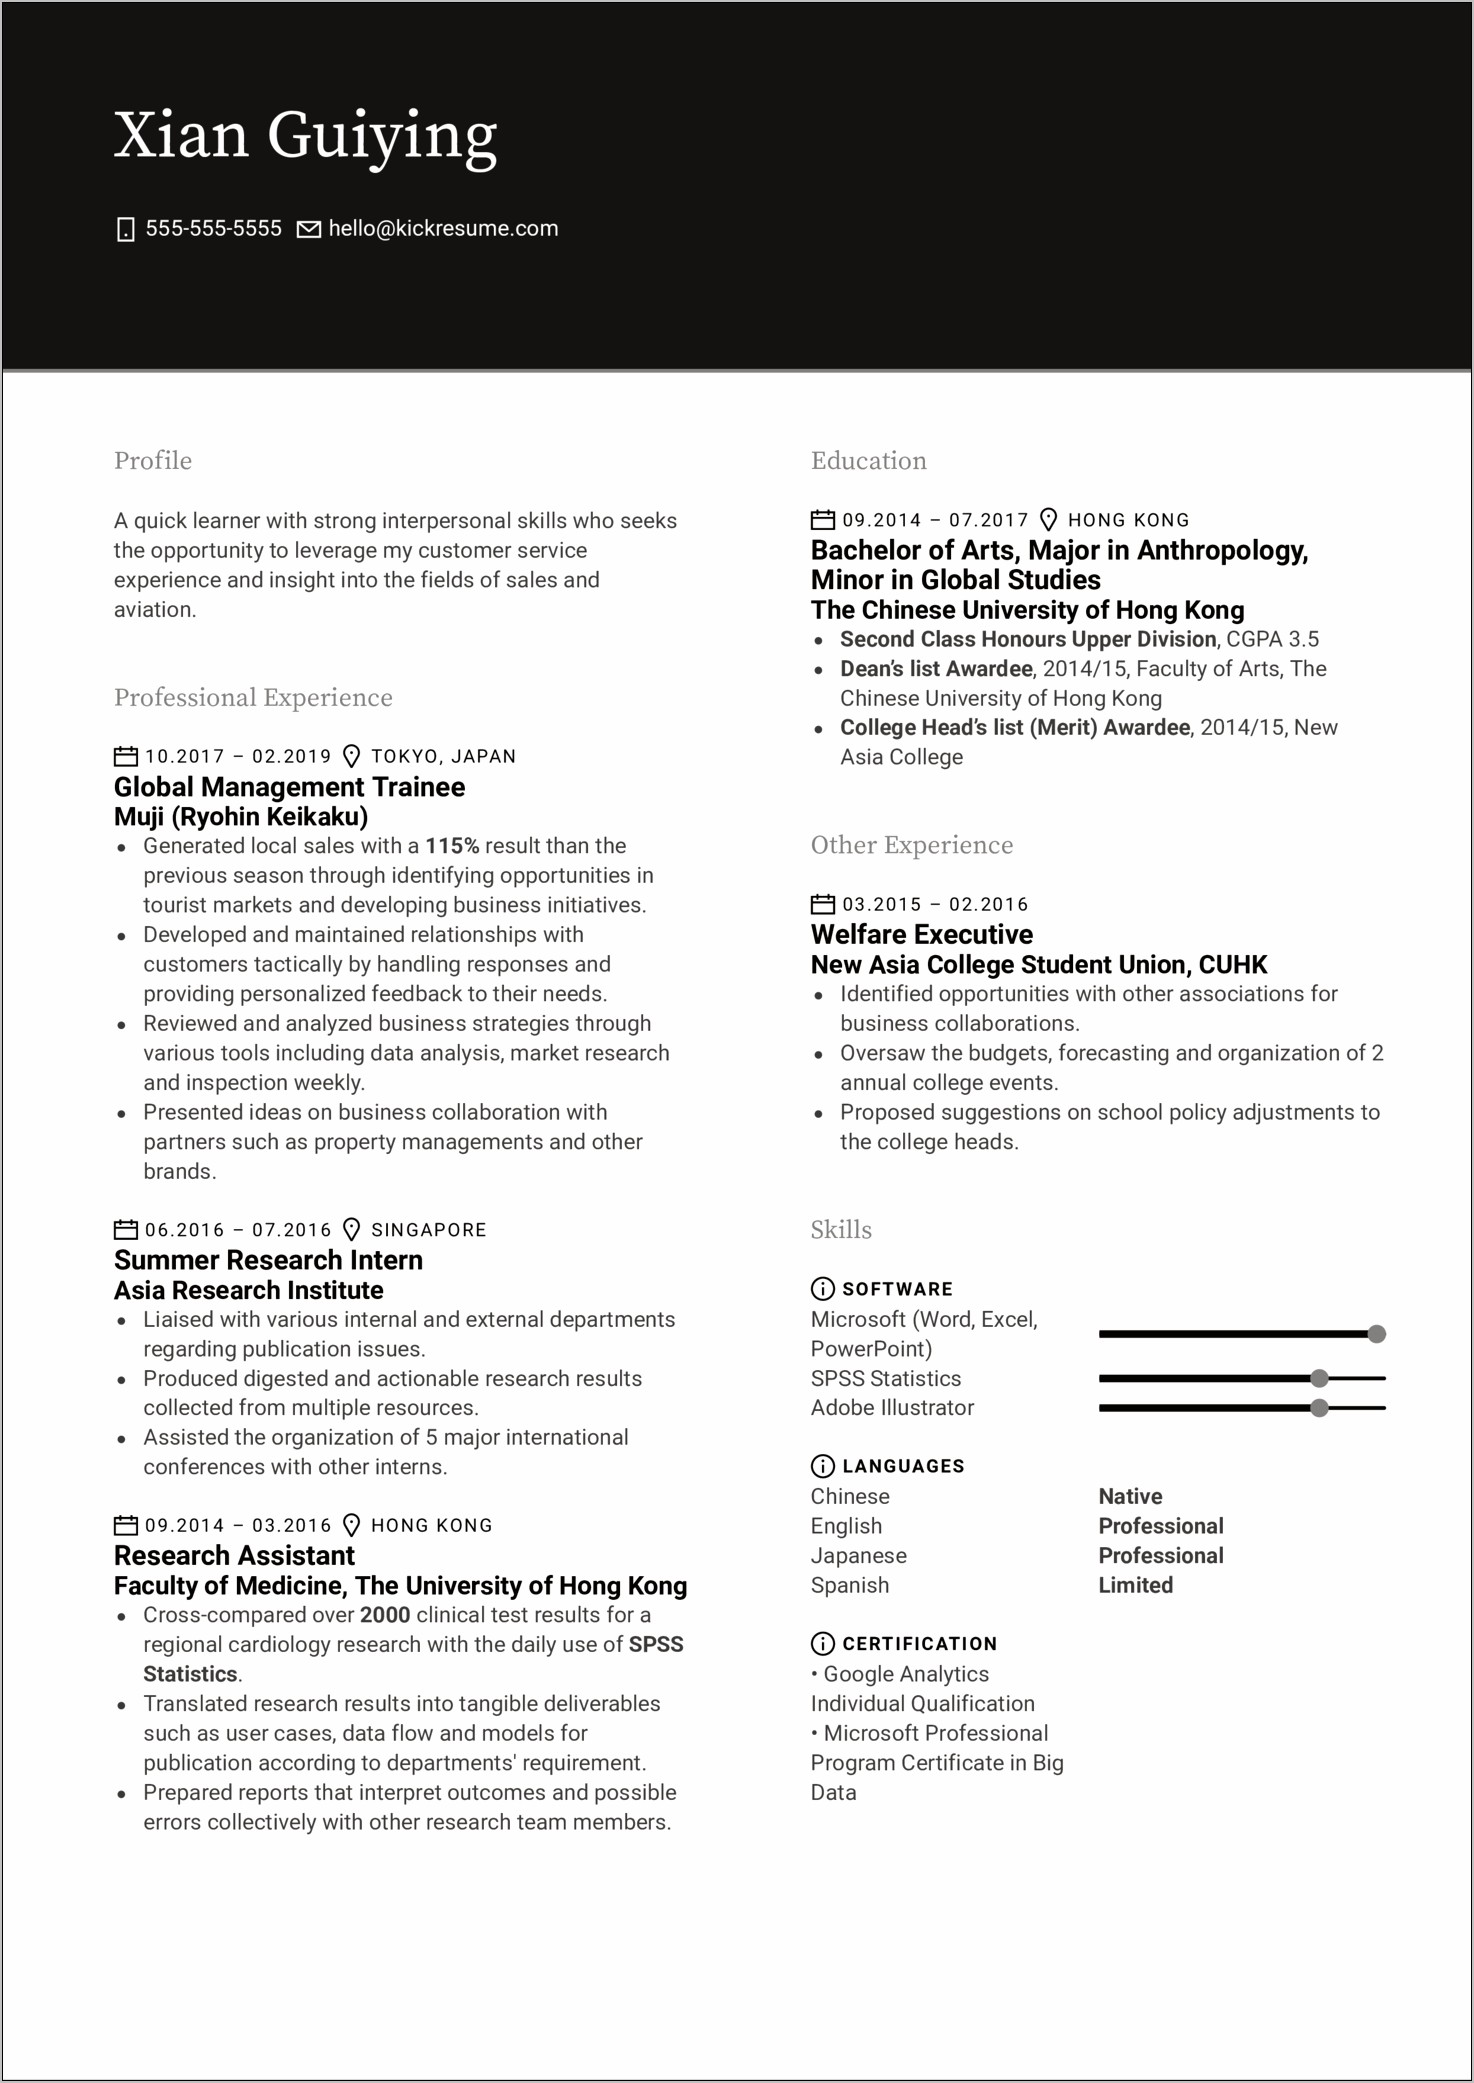 Resume Example Including Conferences And Publications